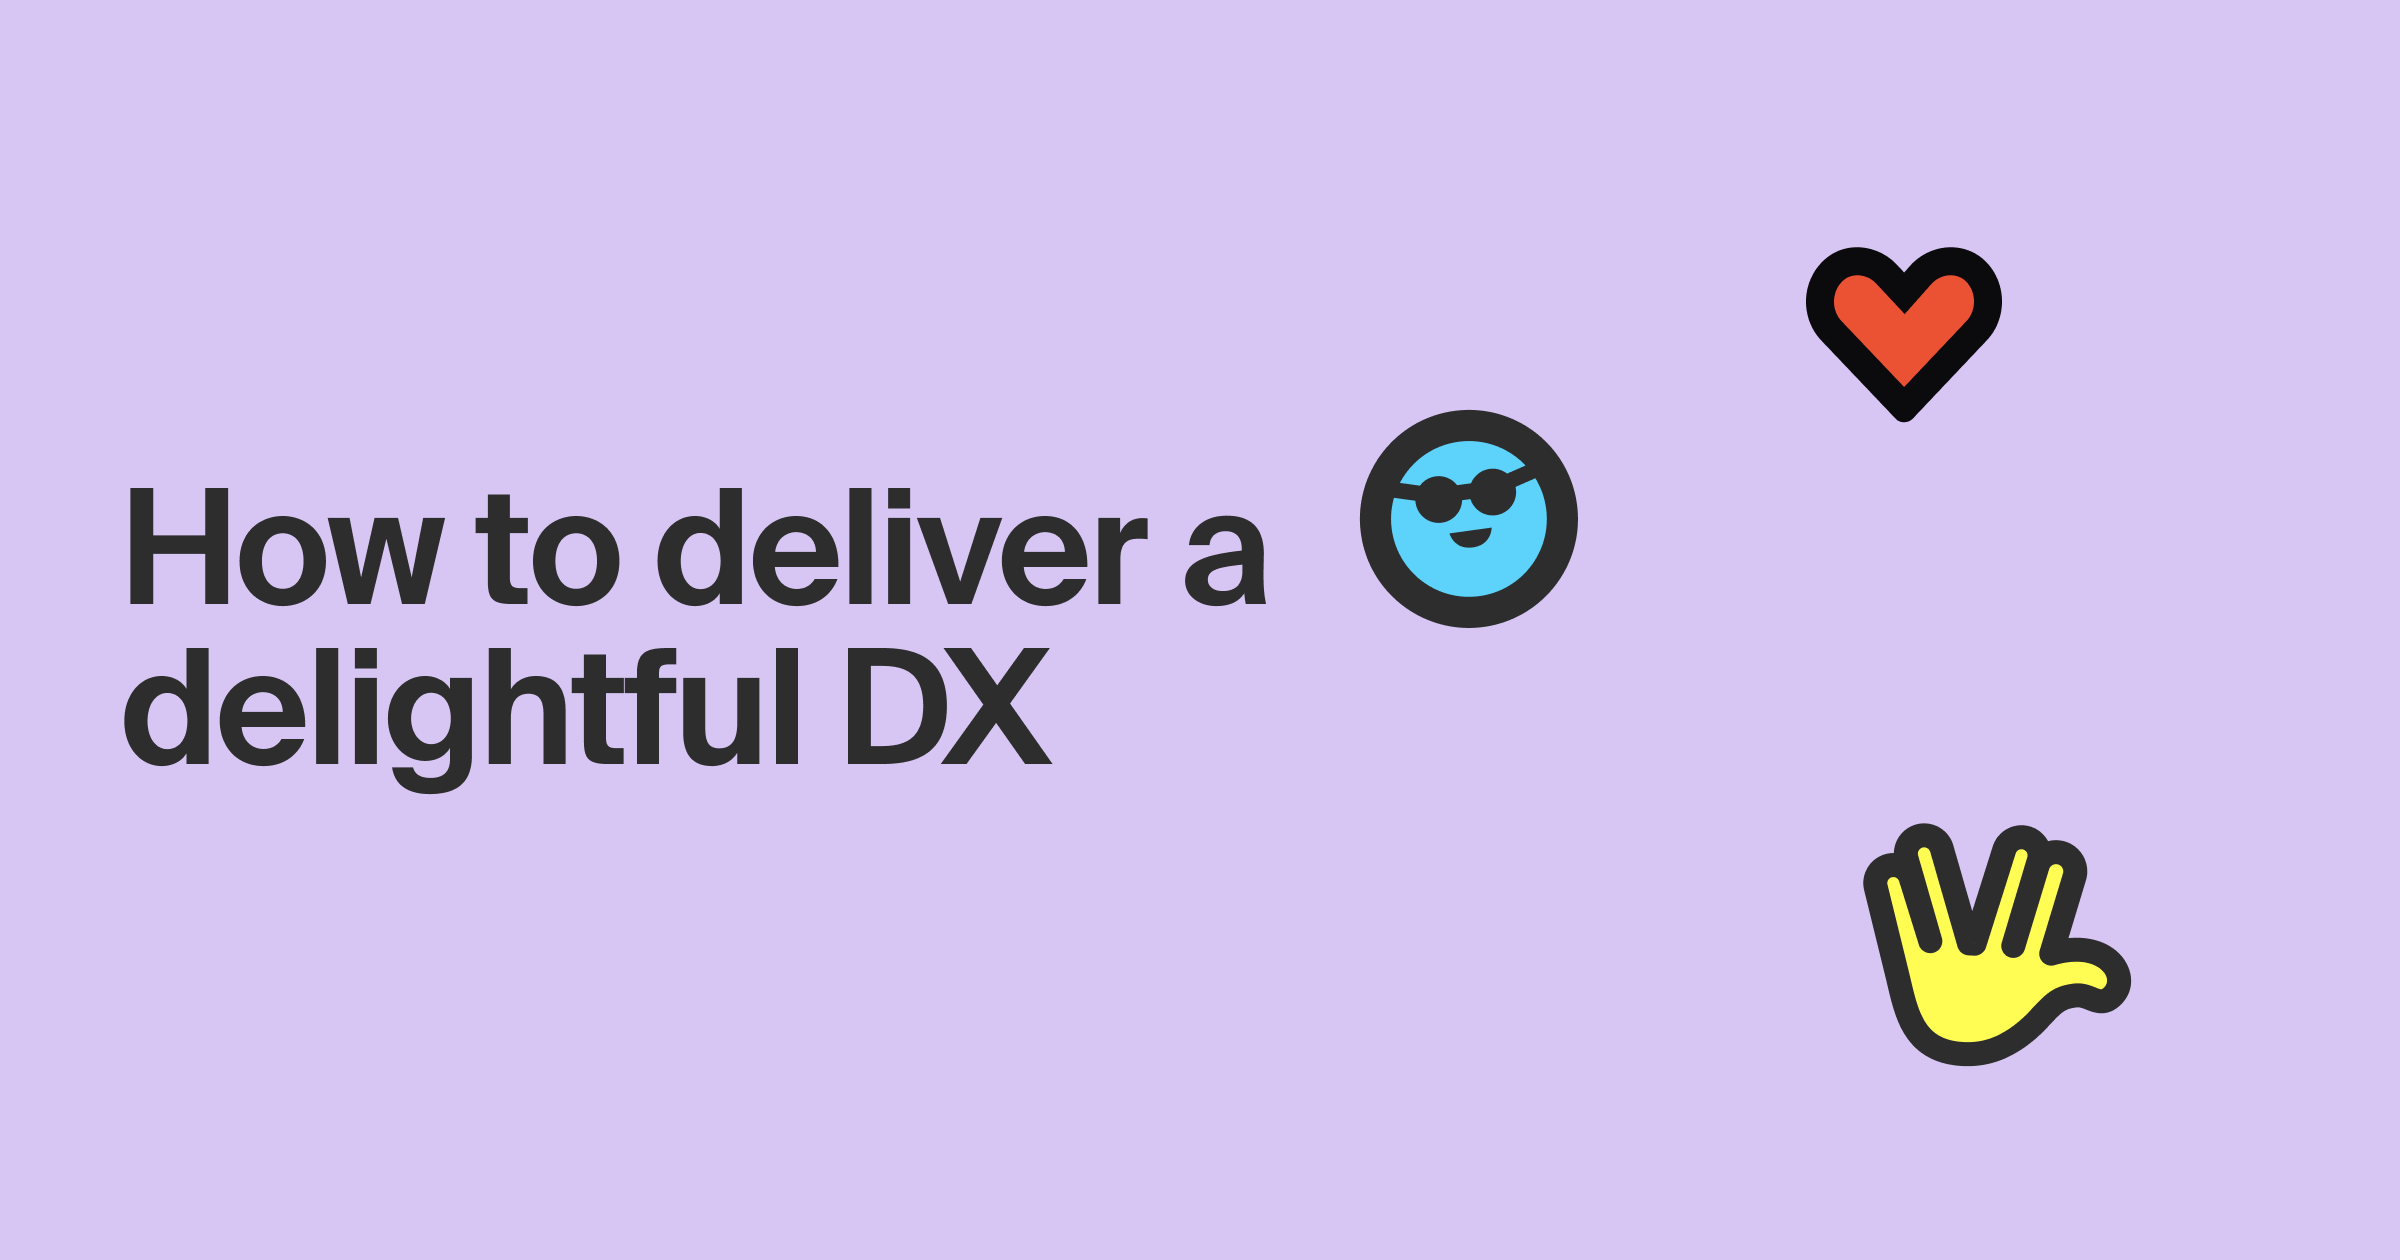 How to deliver a delightful DX